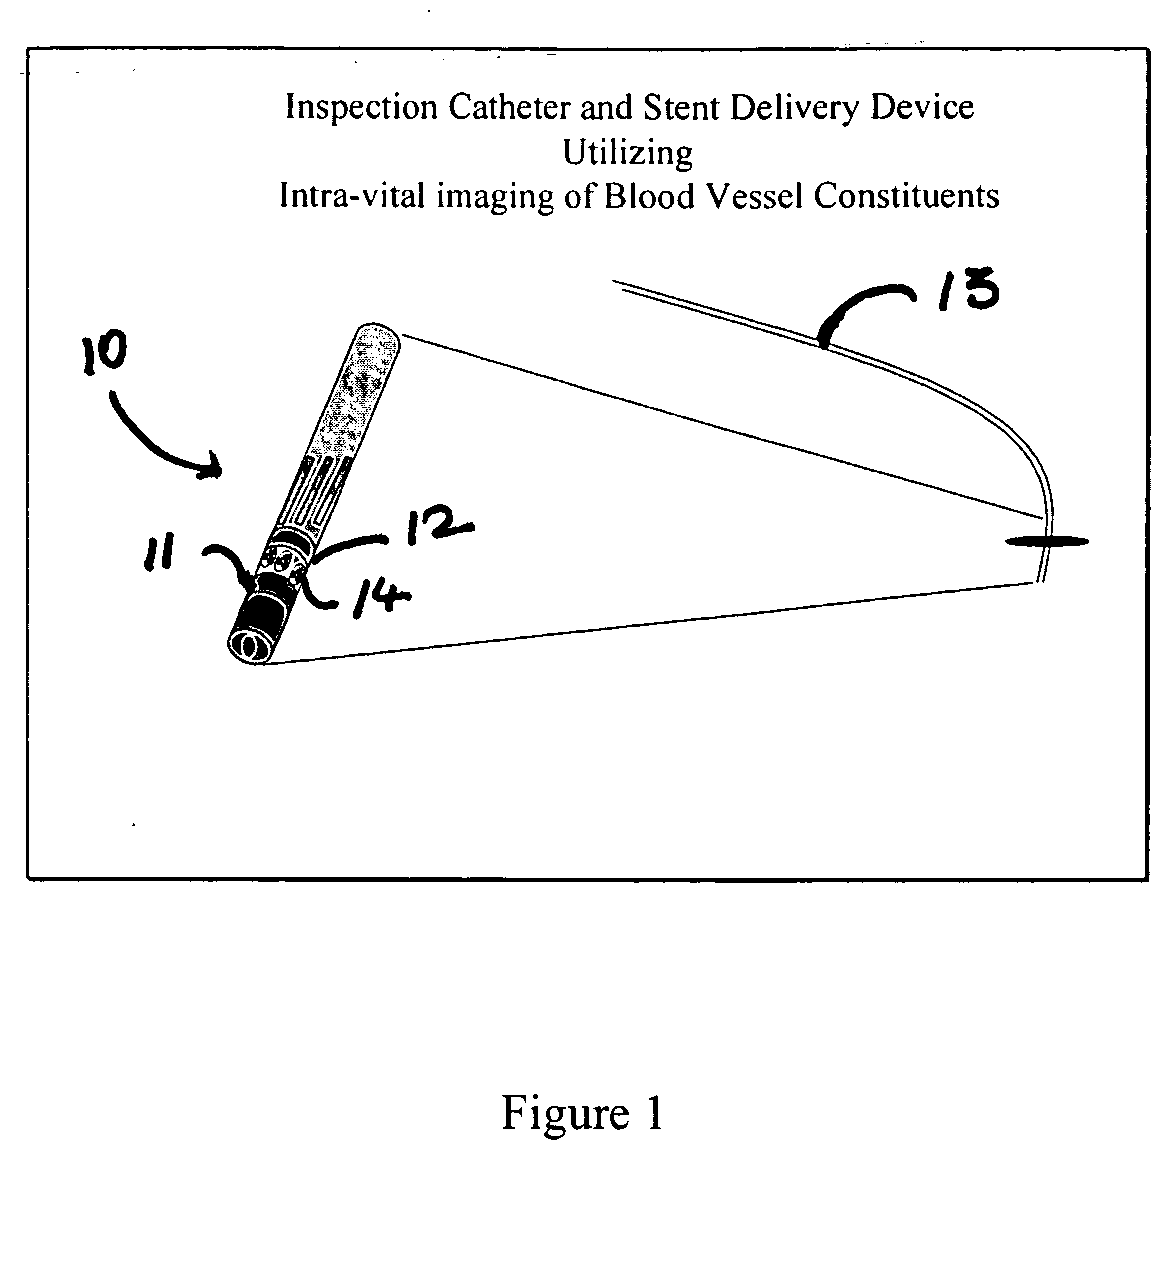 Intravascular imaging device and uses thereof